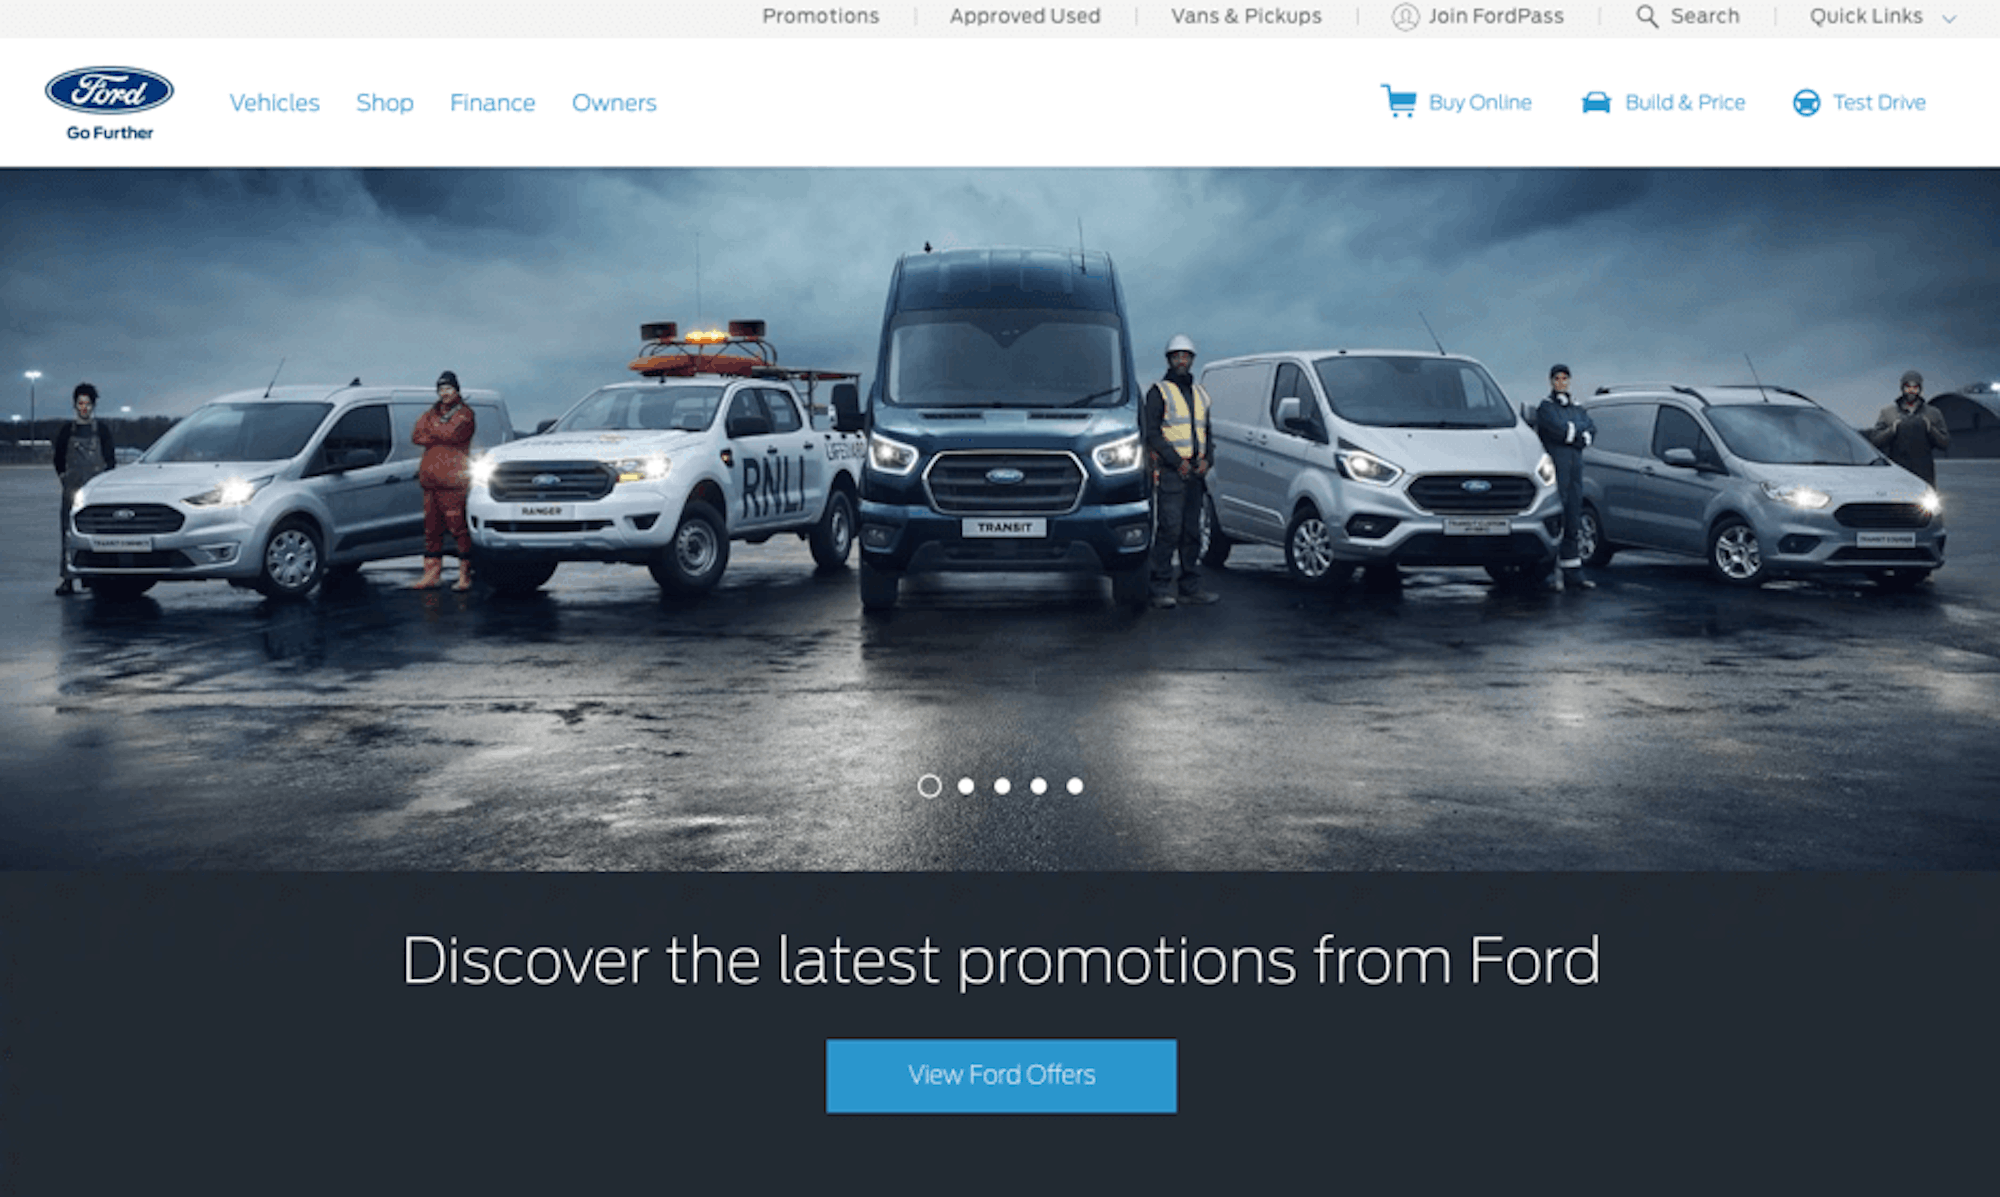 Ford's home page. Displays current offers very well.